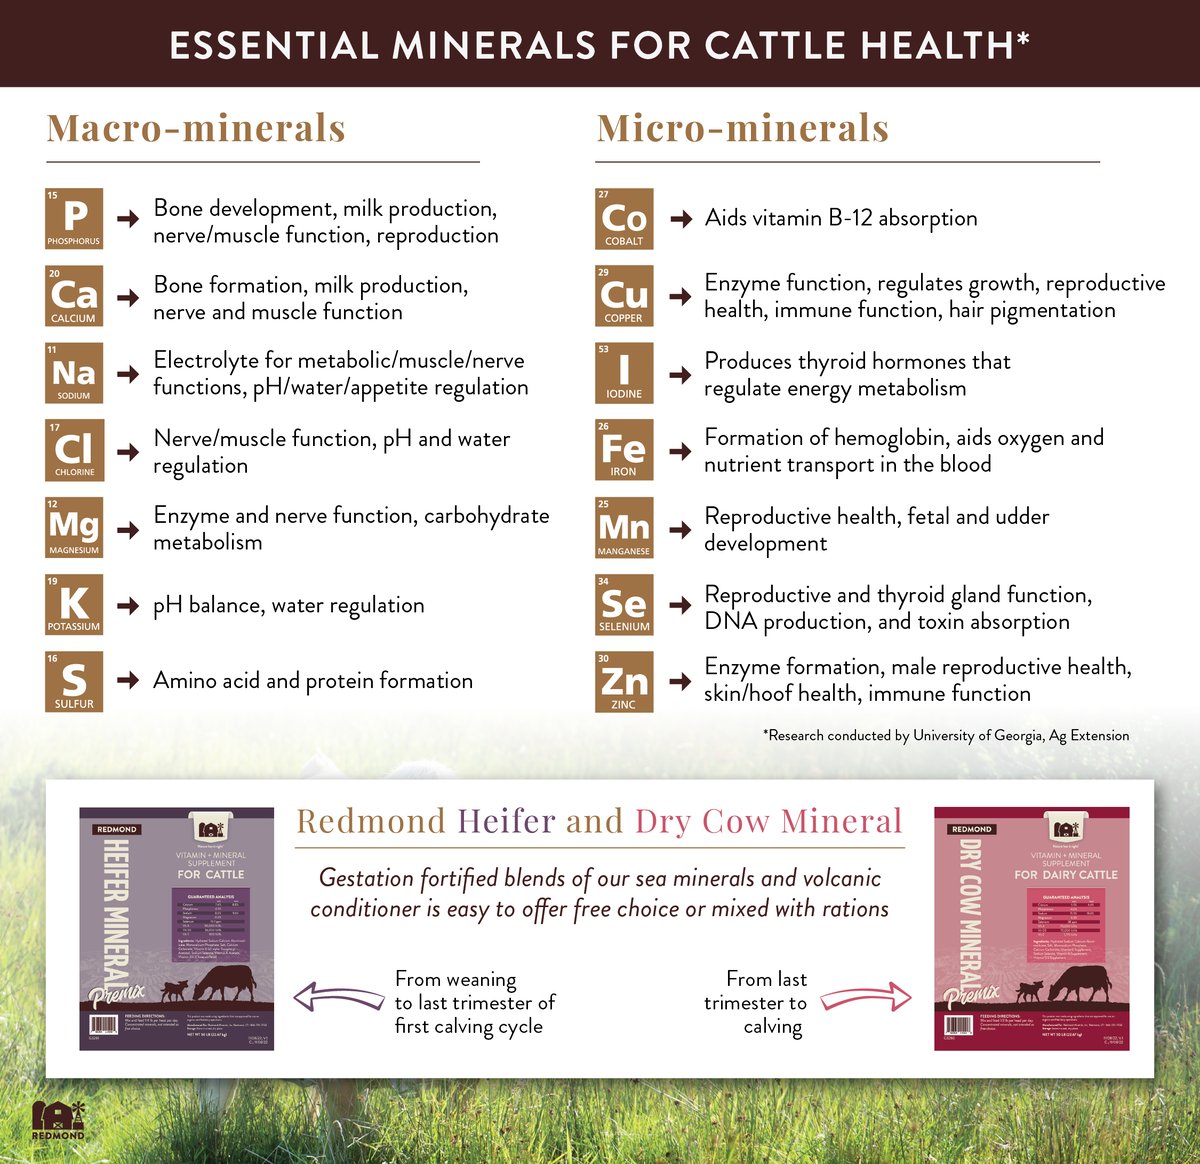 Minerals for pregnant cows